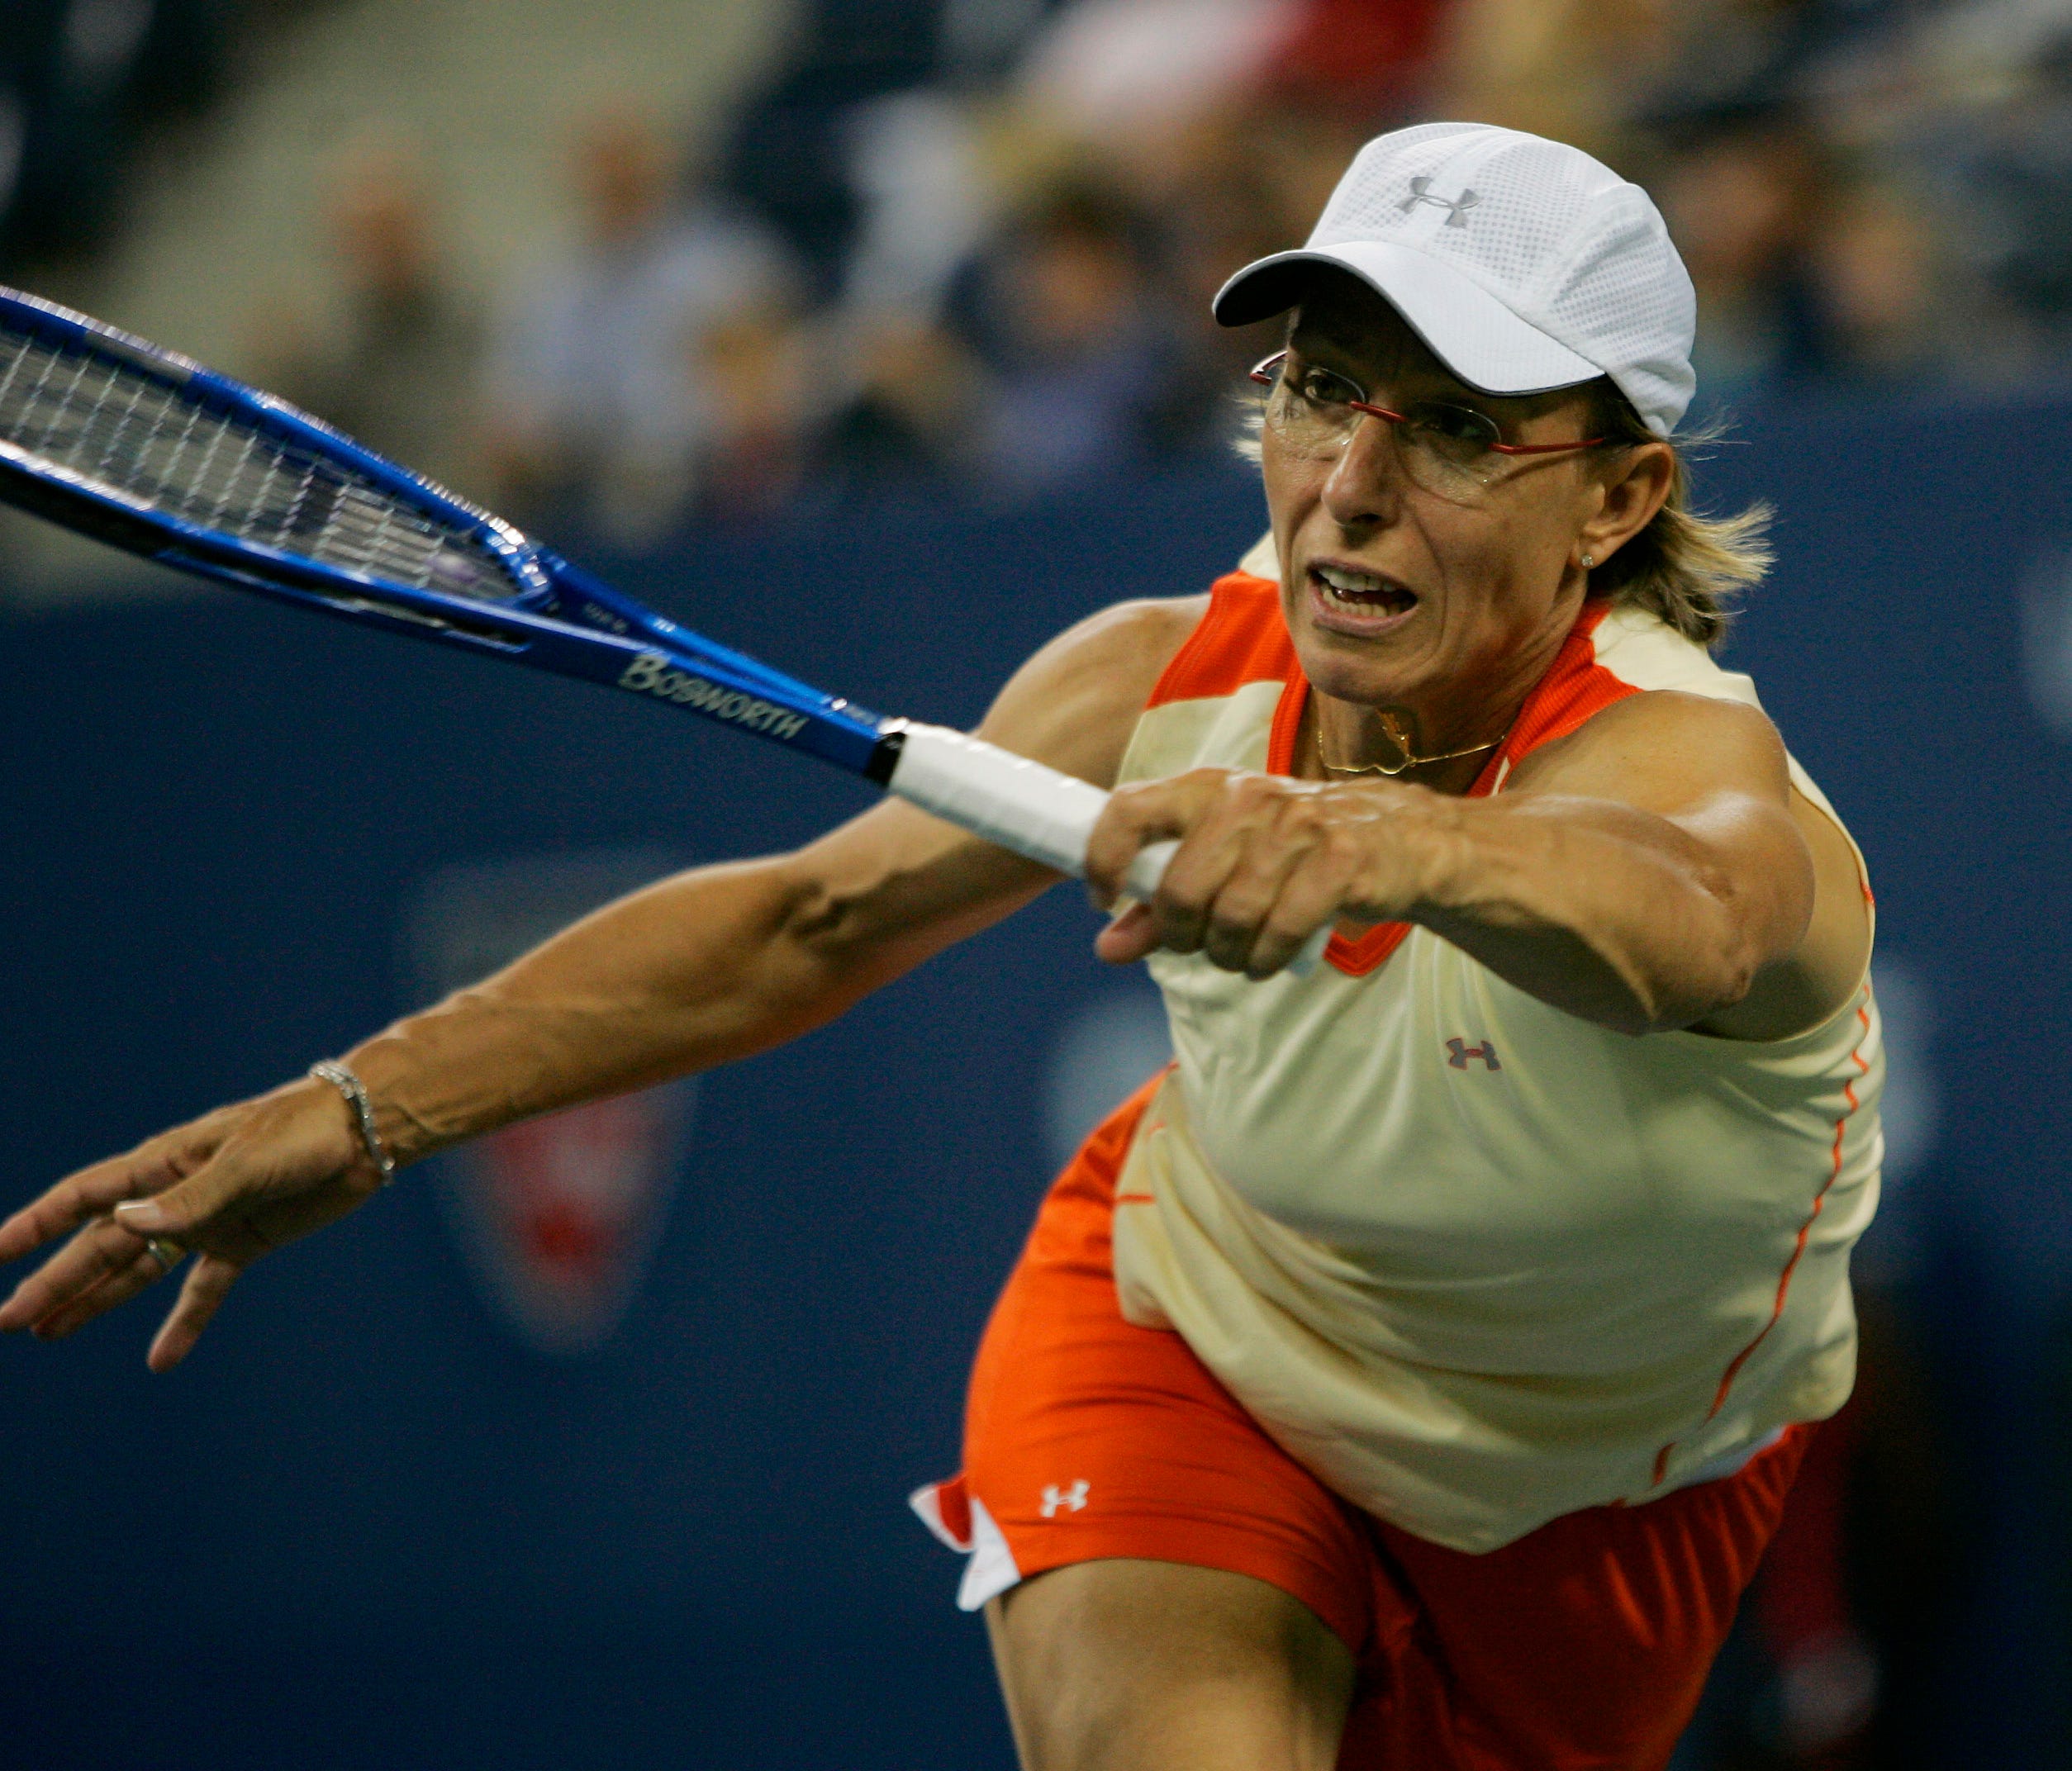 Martina Navratilova, a retired Czech and American tennis player and coach, had breast cancer in February of 2010. She had a successful lumpectomy in March of that year and began her radiation treatment in May, according to CNN's report.